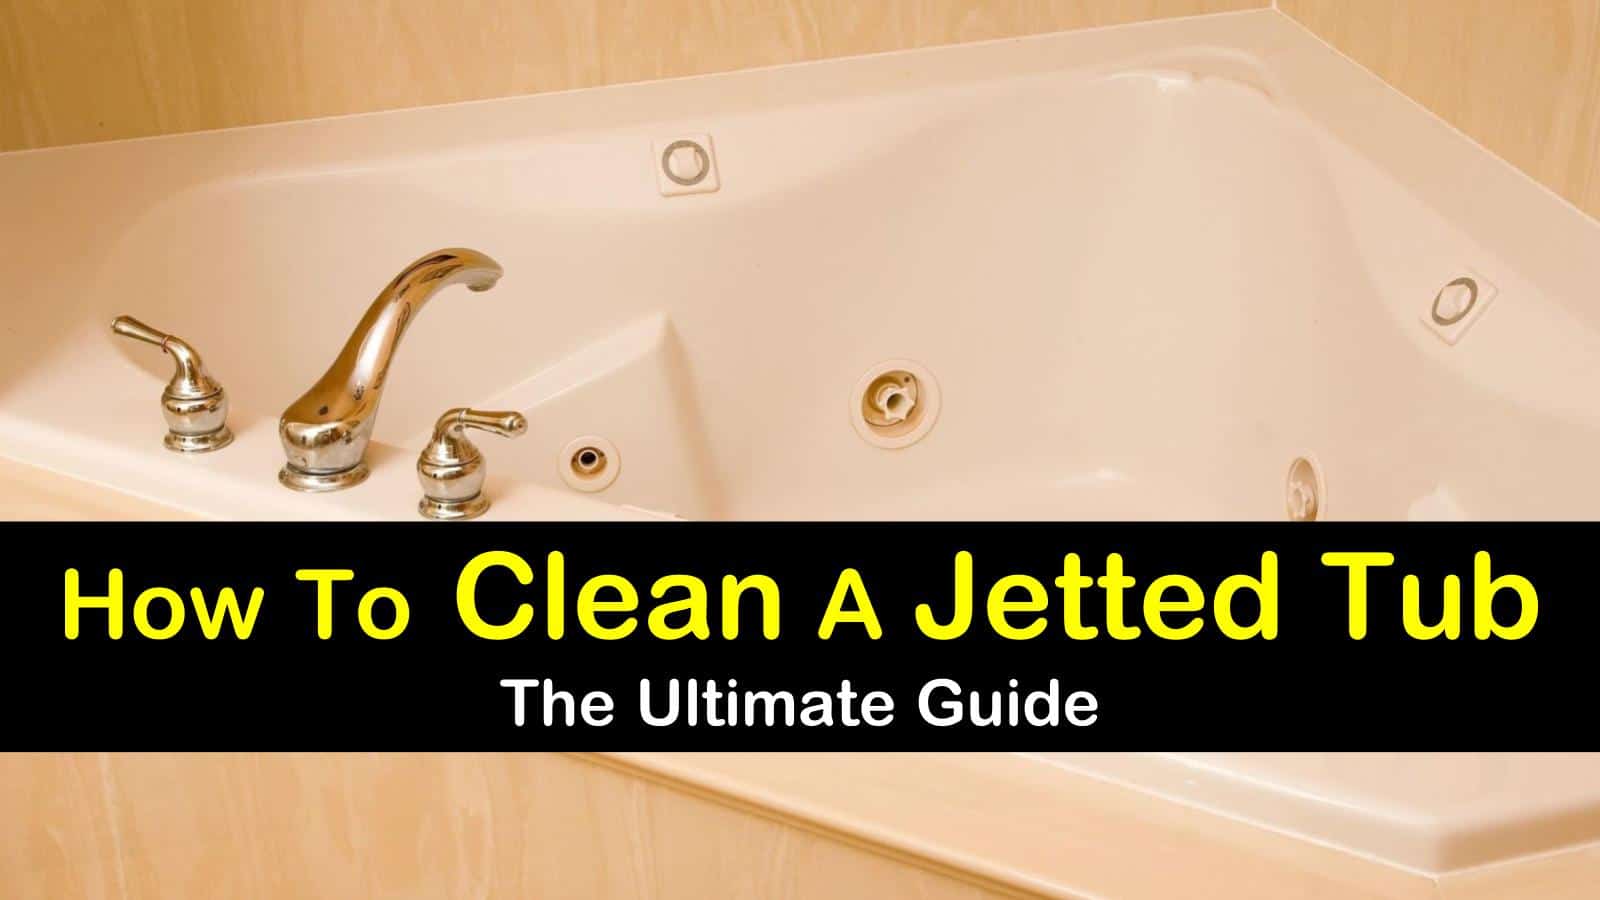 3 Smart Simple Ways To Clean A Jetted Tub, How To Work Bathtub Jets